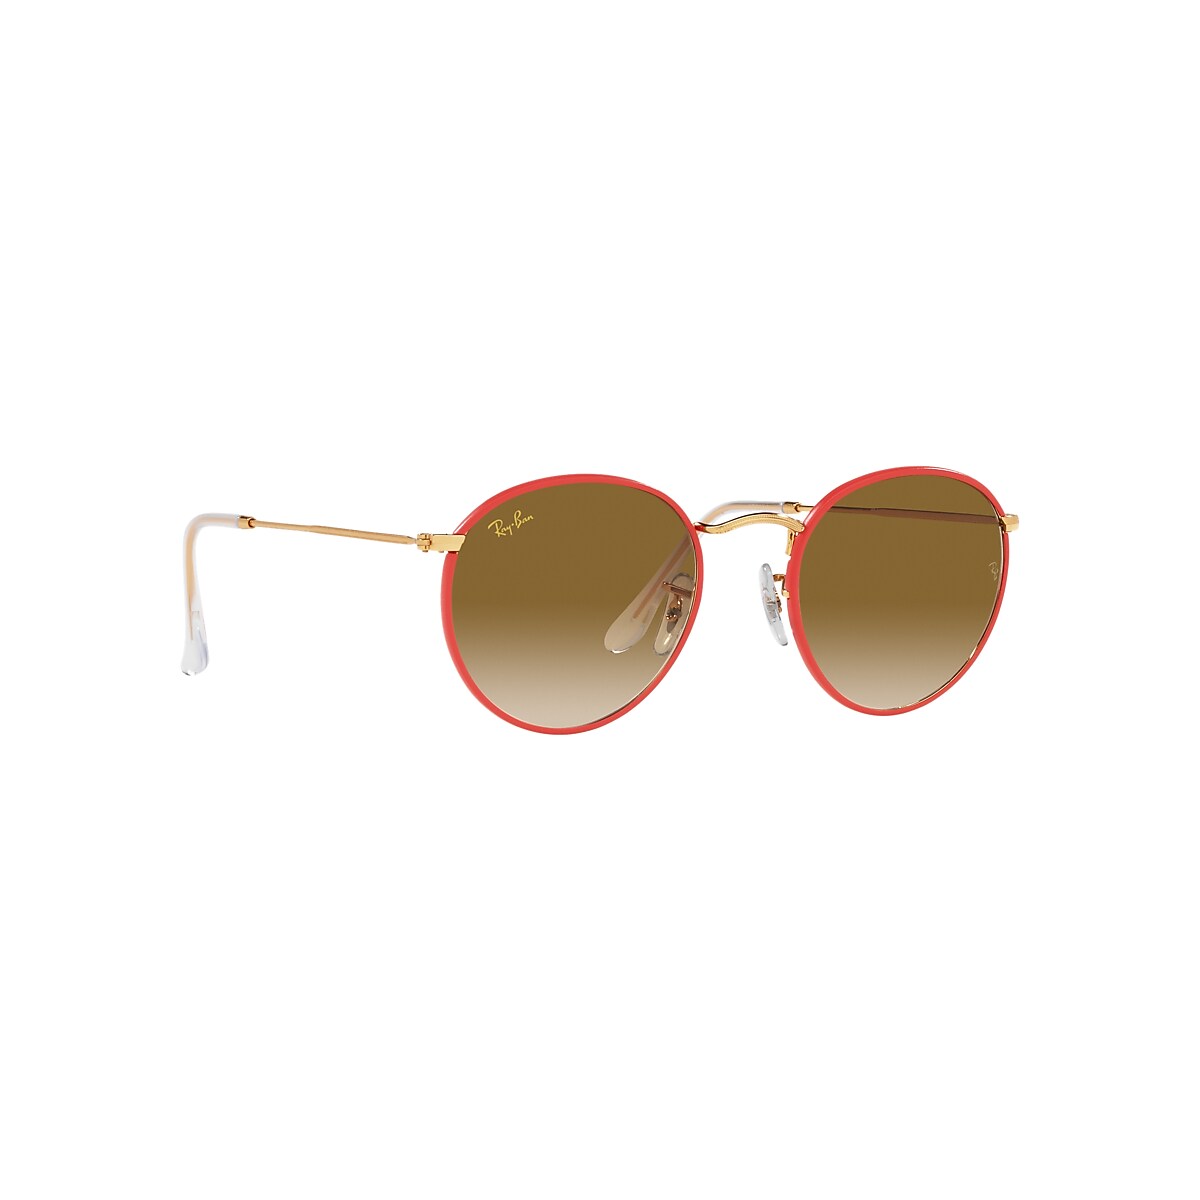 Round Metal Full Color Legend Sunglasses in Red and Light Brown 